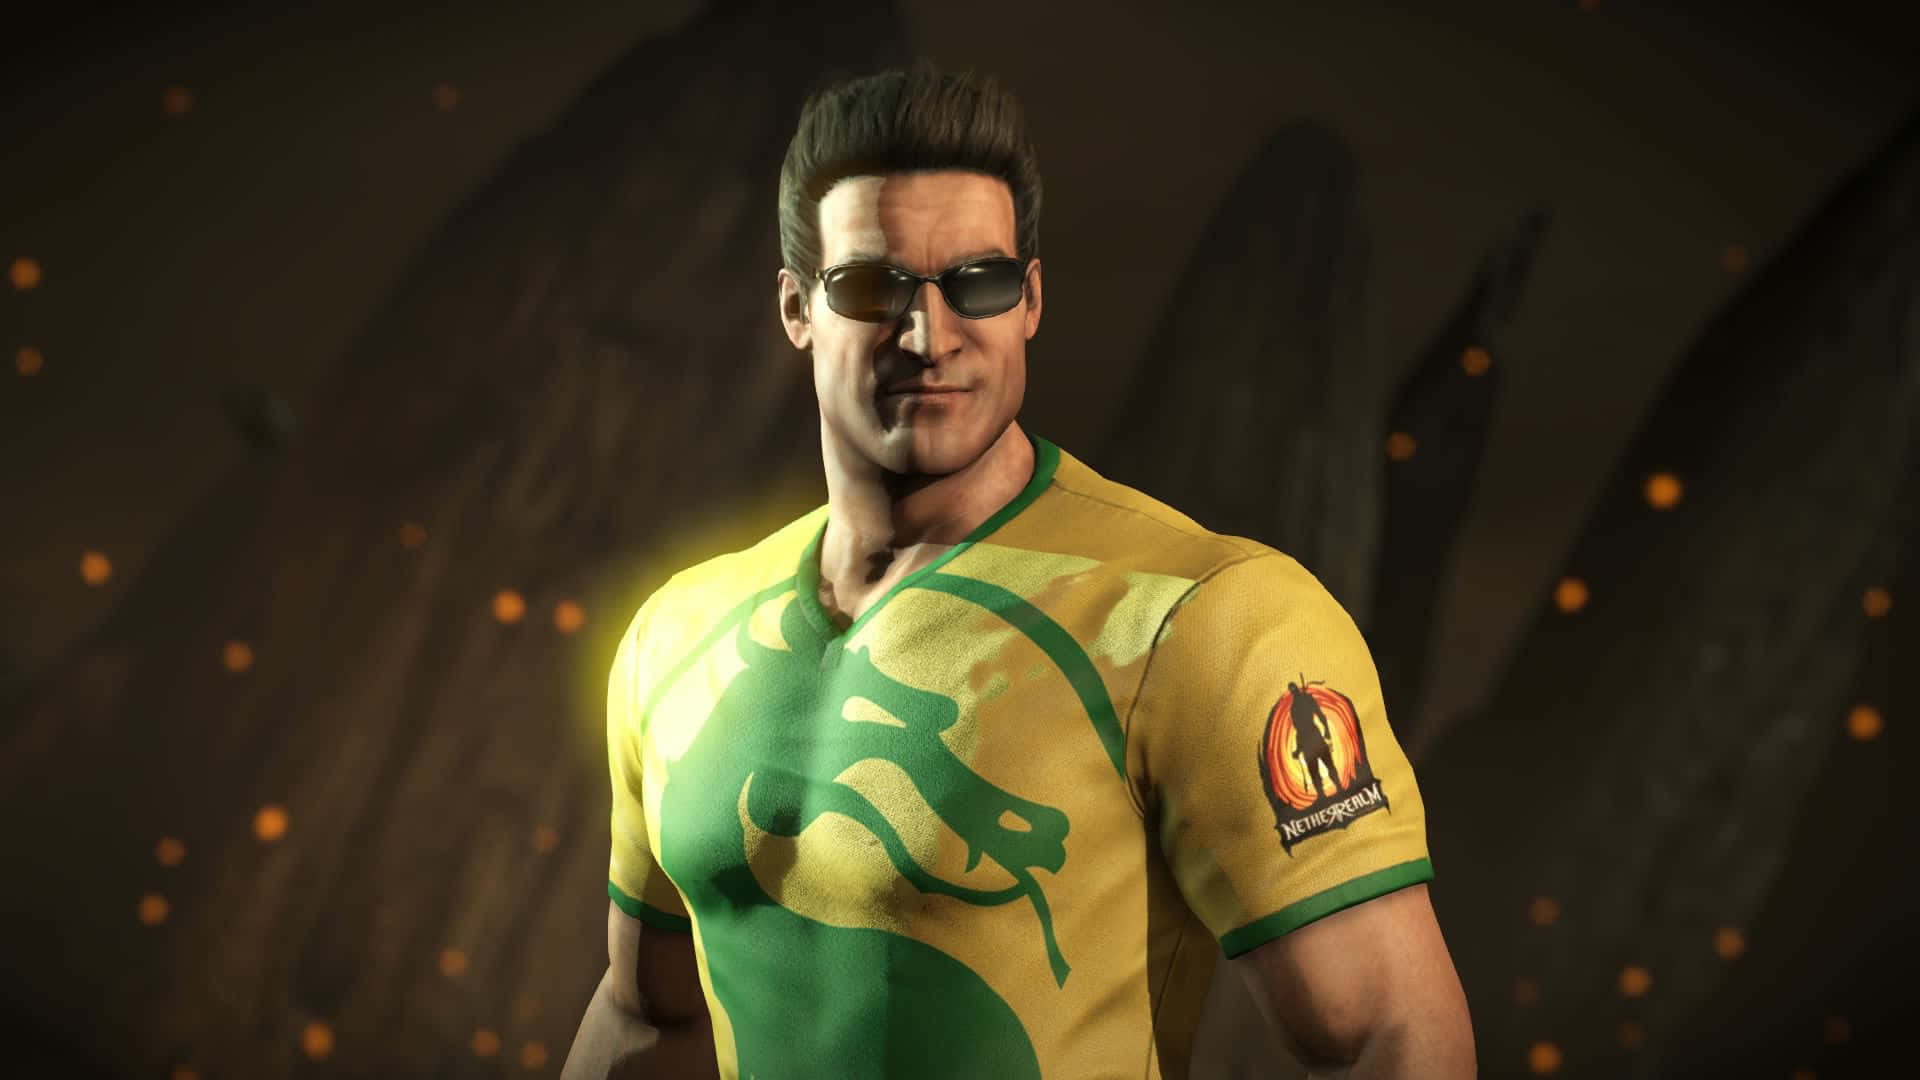 Johnny Cage unleashes his power in Mortal Kombat Wallpaper